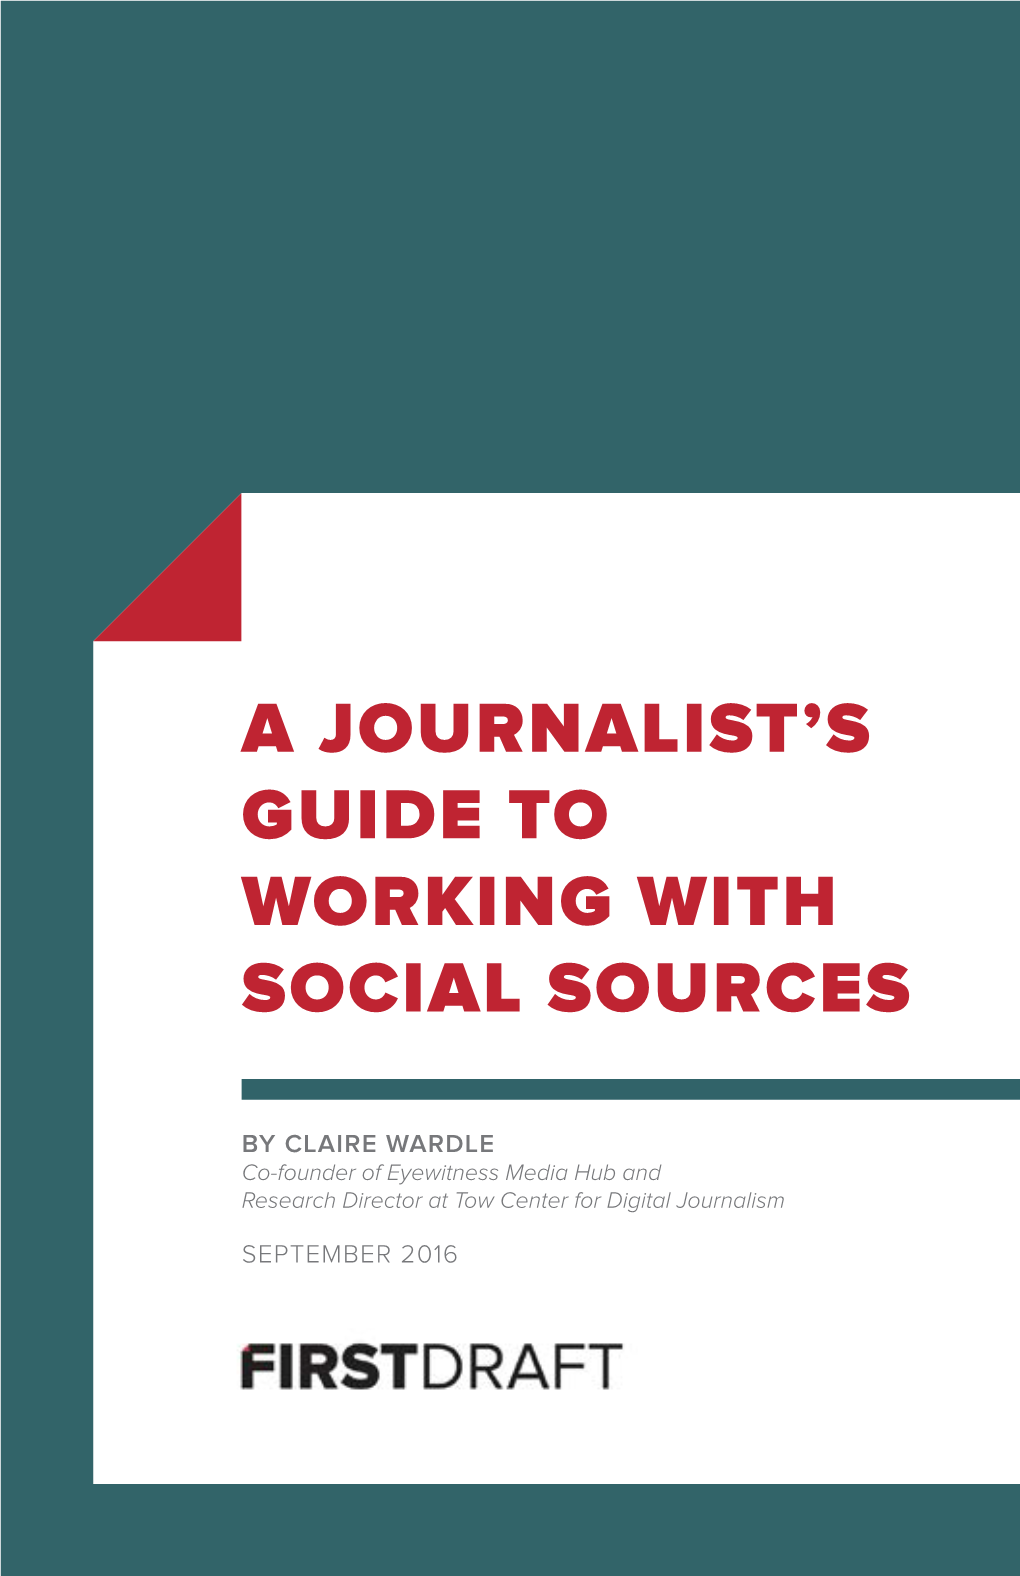 A Journalist's Guide to Working with Social Sources